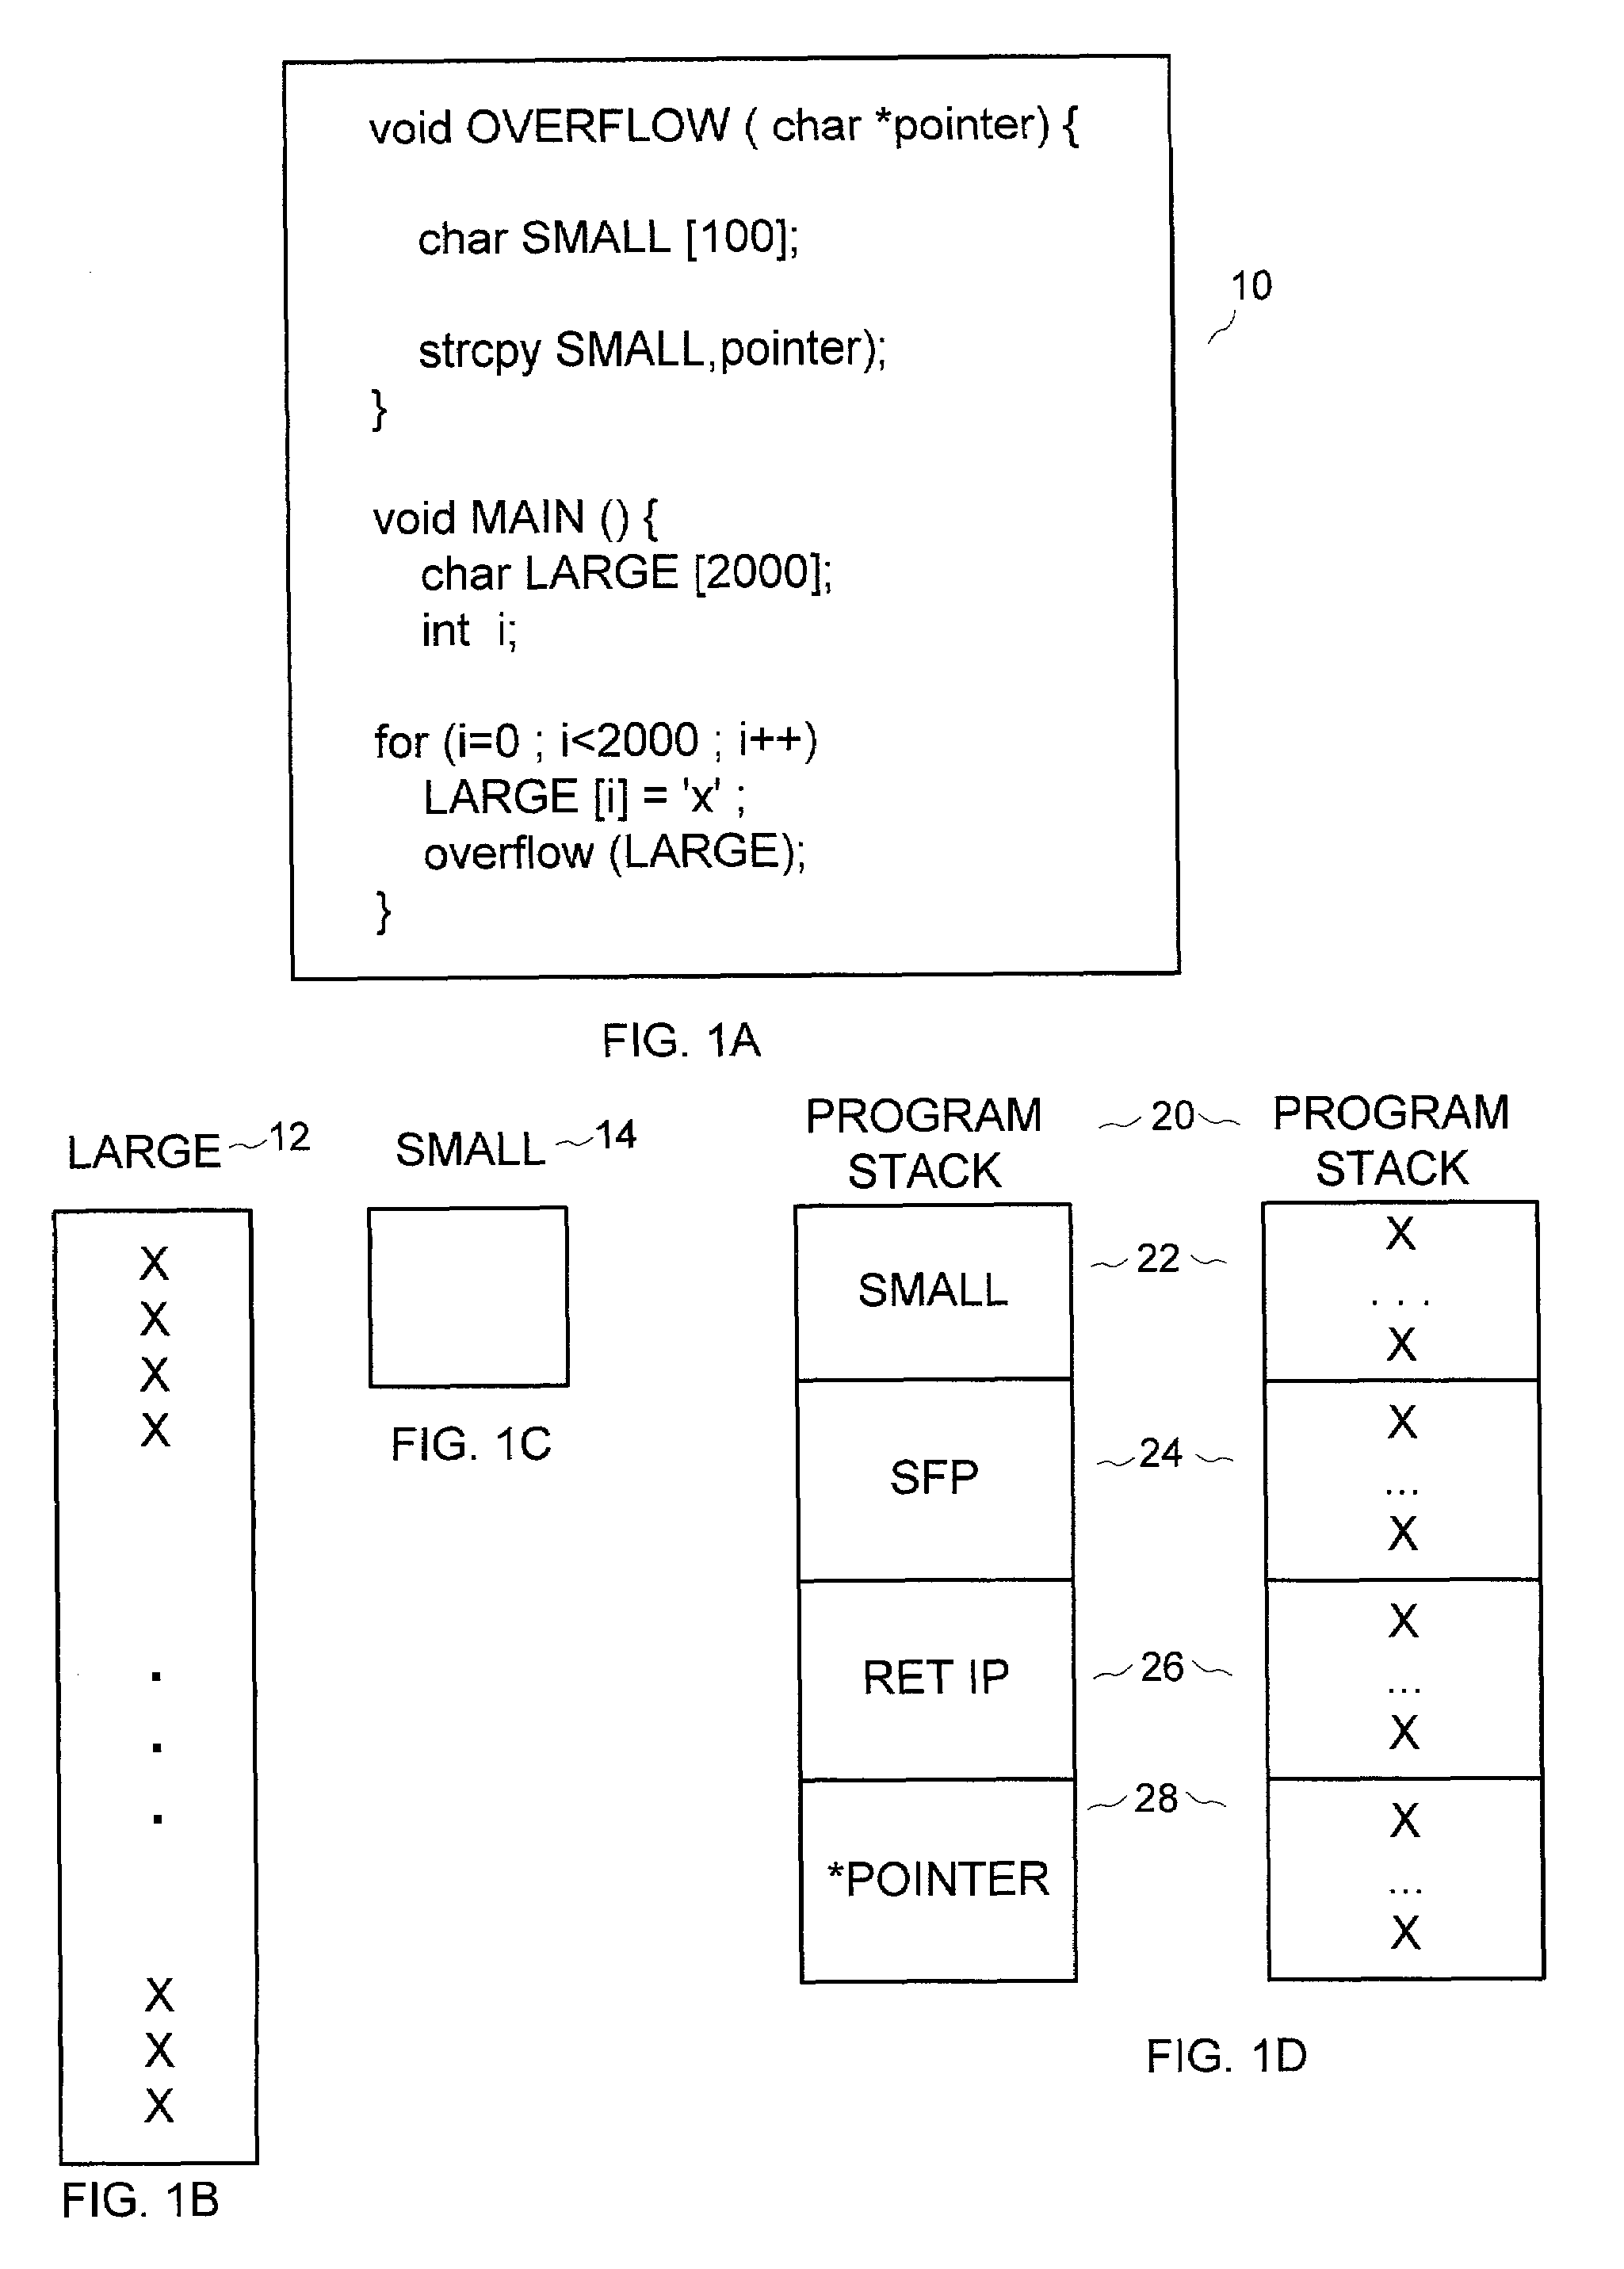 System and method for identifying and eliminating vulnerabilities in computer software applications